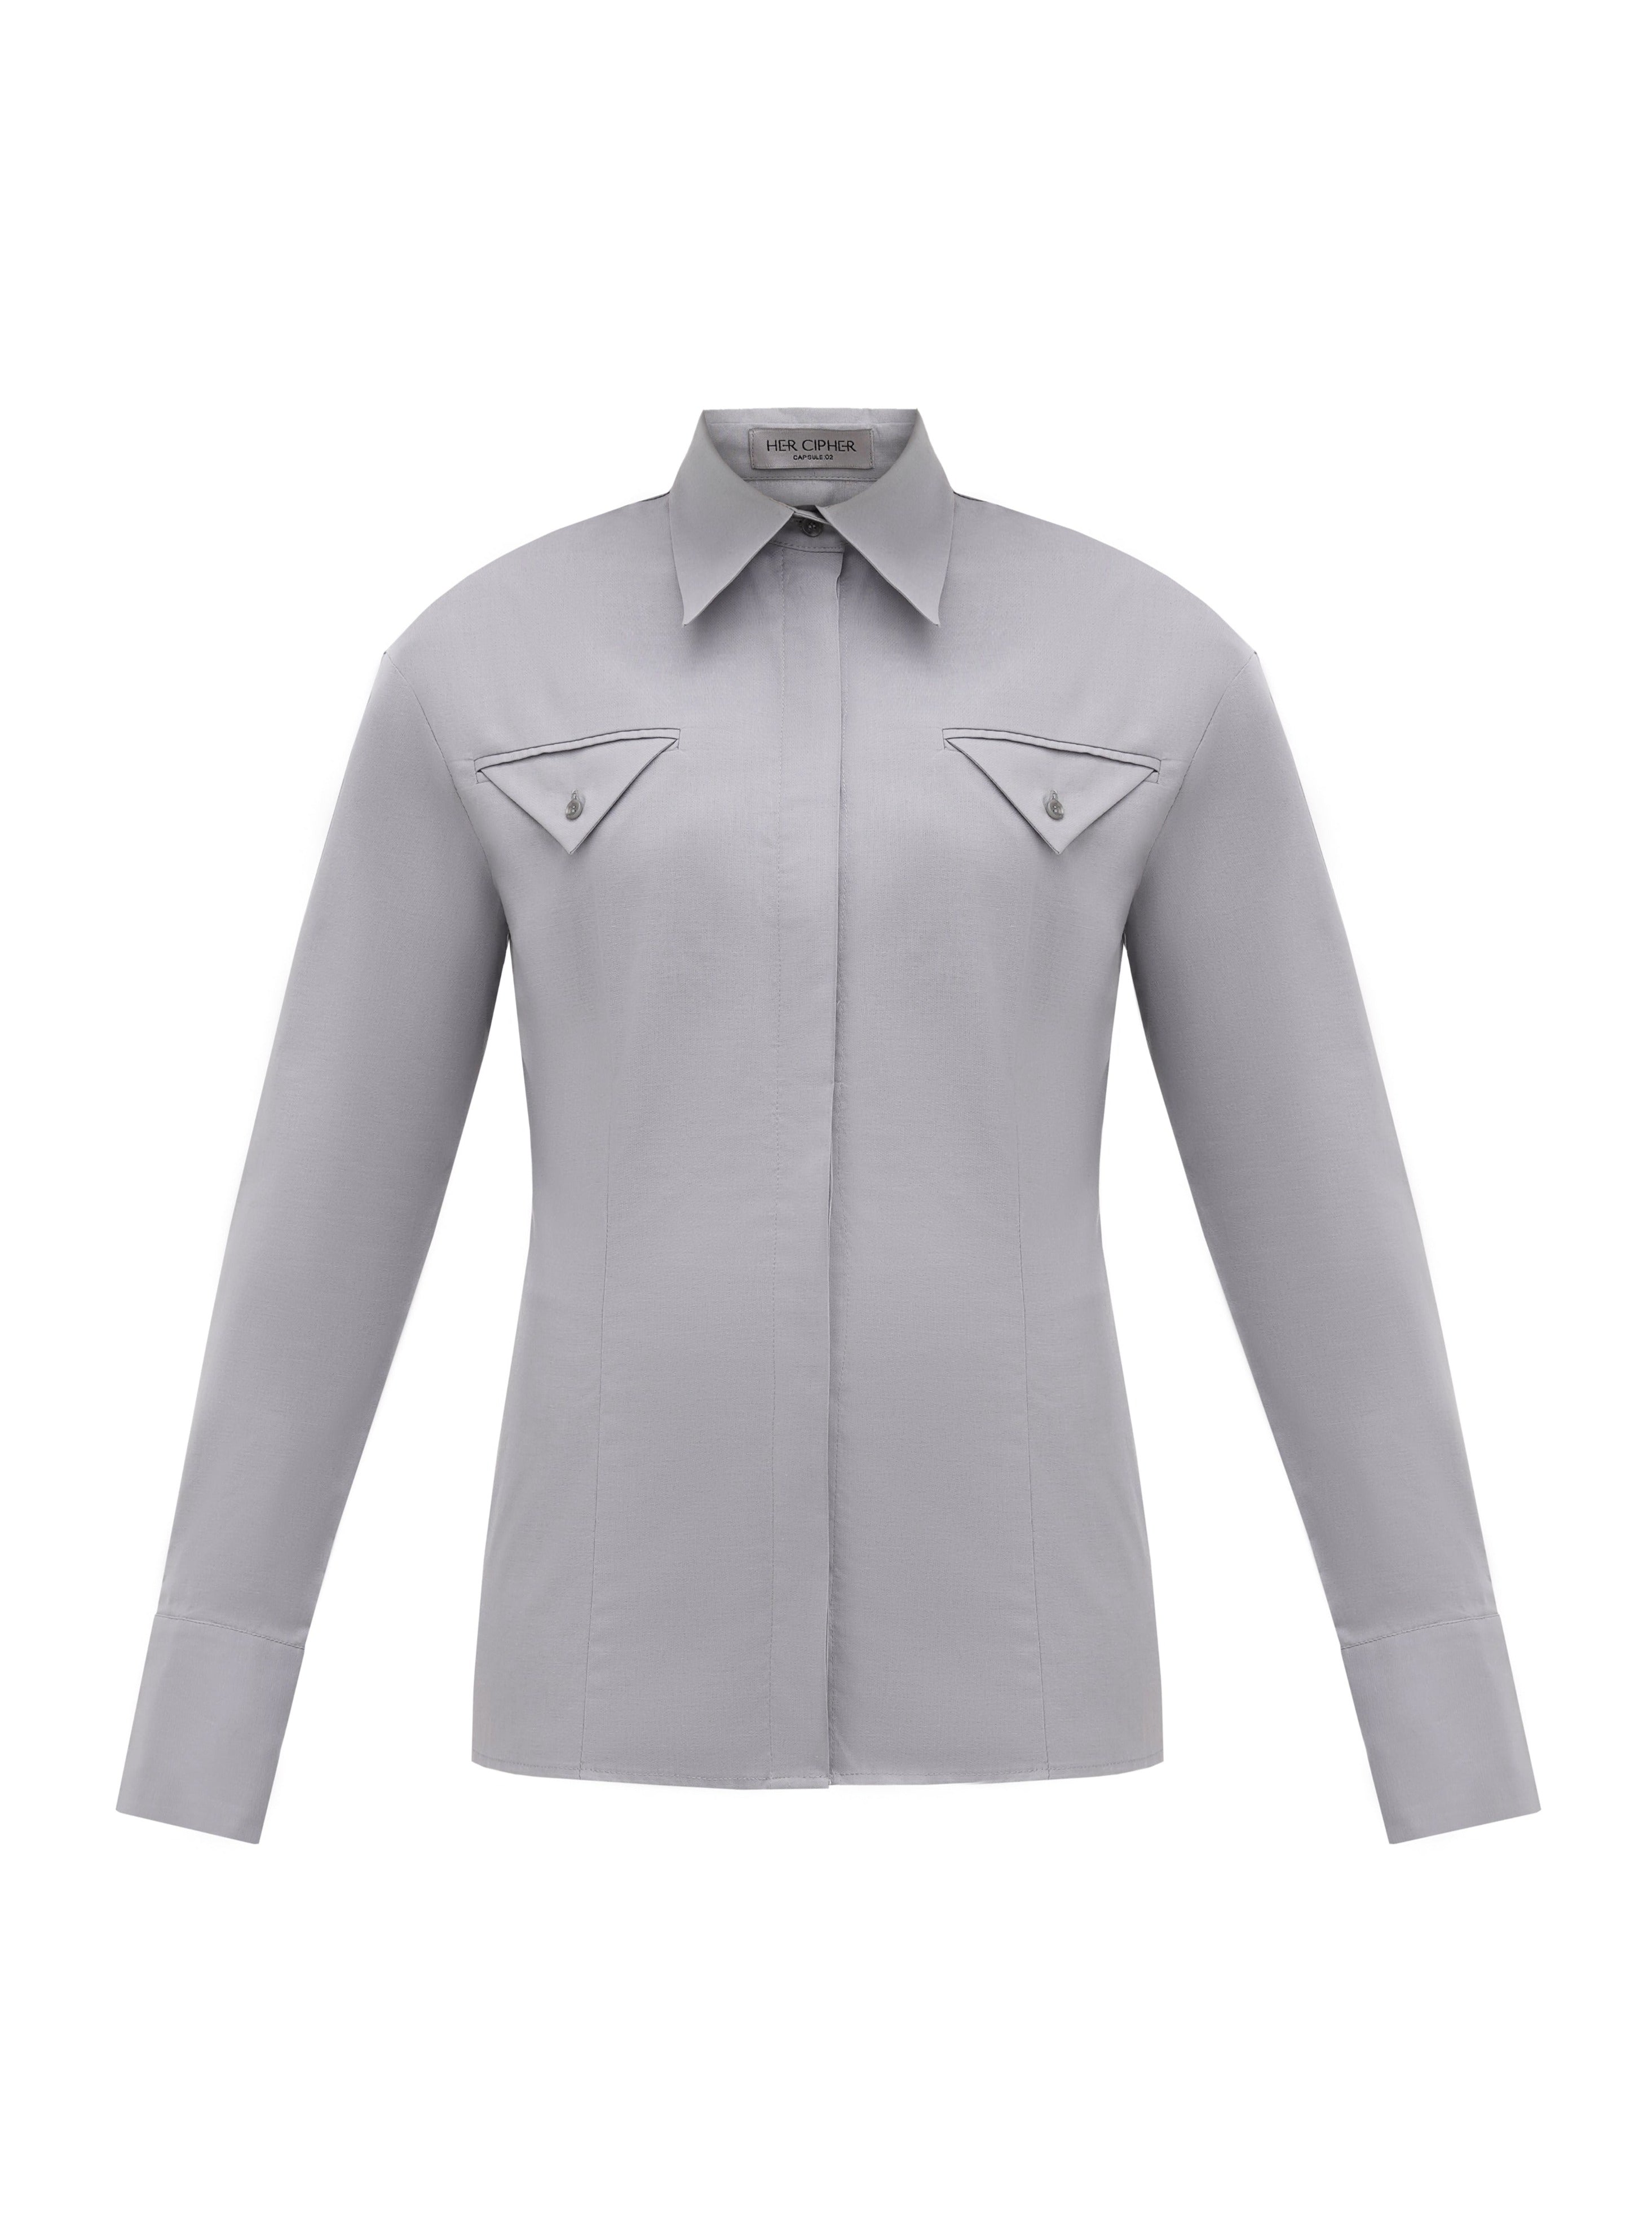 A sustainable organic cotton shirt in grey color with pointed collar and two triangular pocket details at chest